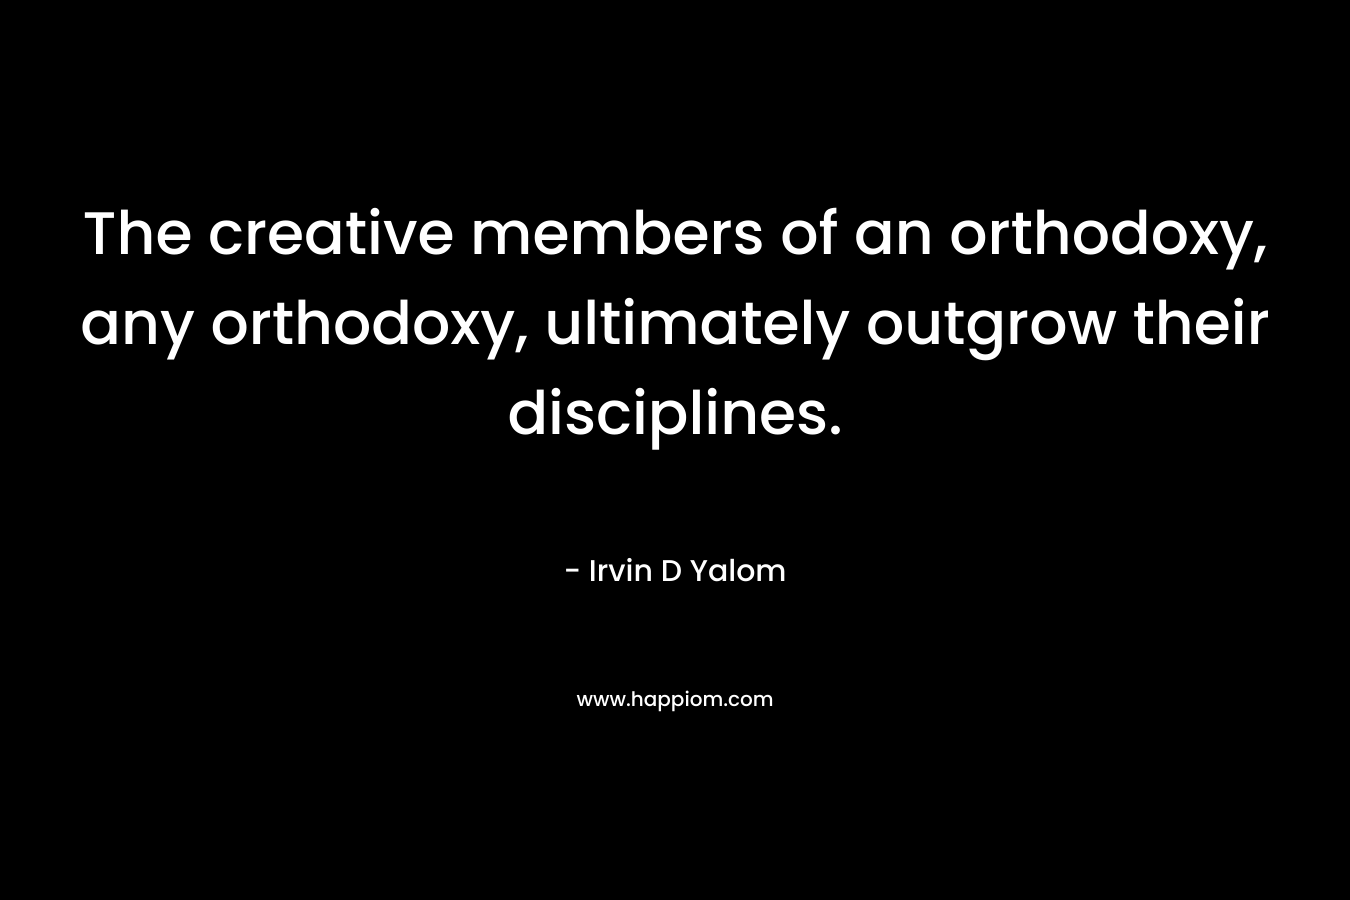 The creative members of an orthodoxy, any orthodoxy, ultimately outgrow their disciplines. – Irvin D Yalom